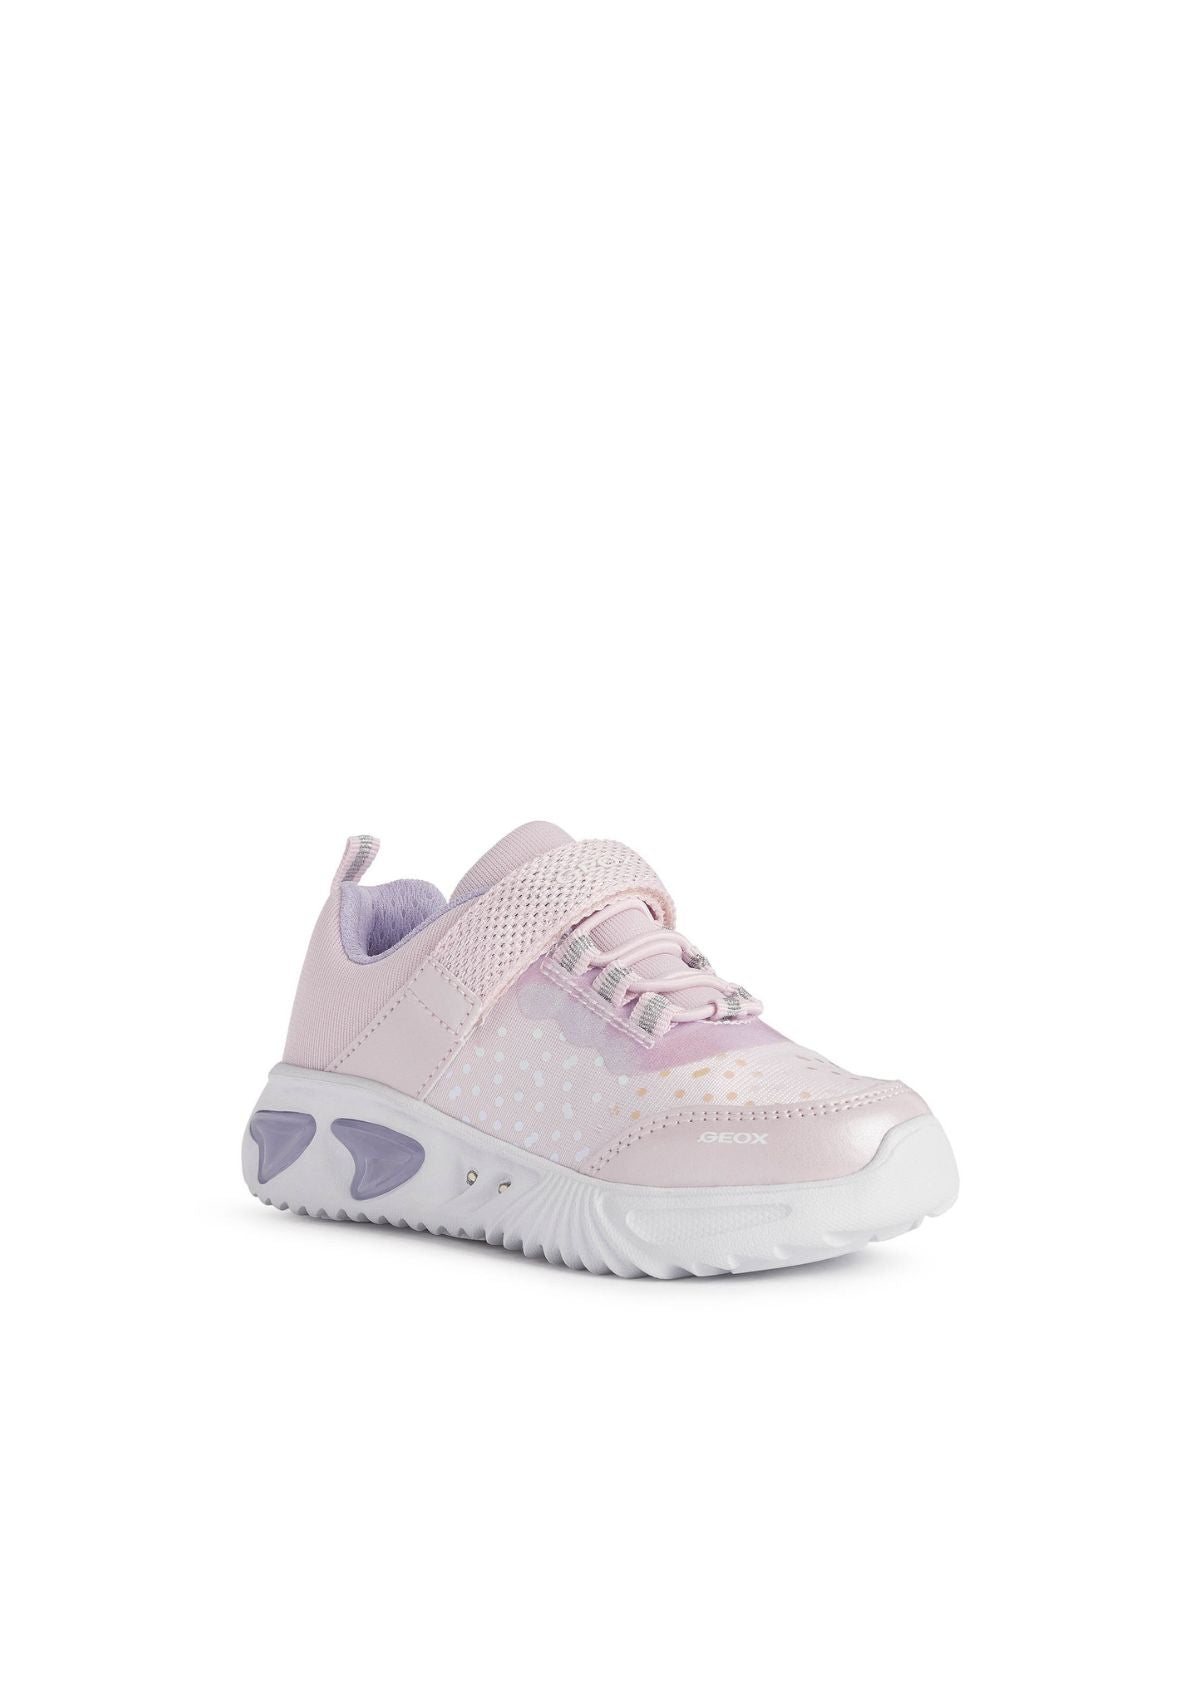 Geox Junior Girls ASSISTER Pink Lilac side front